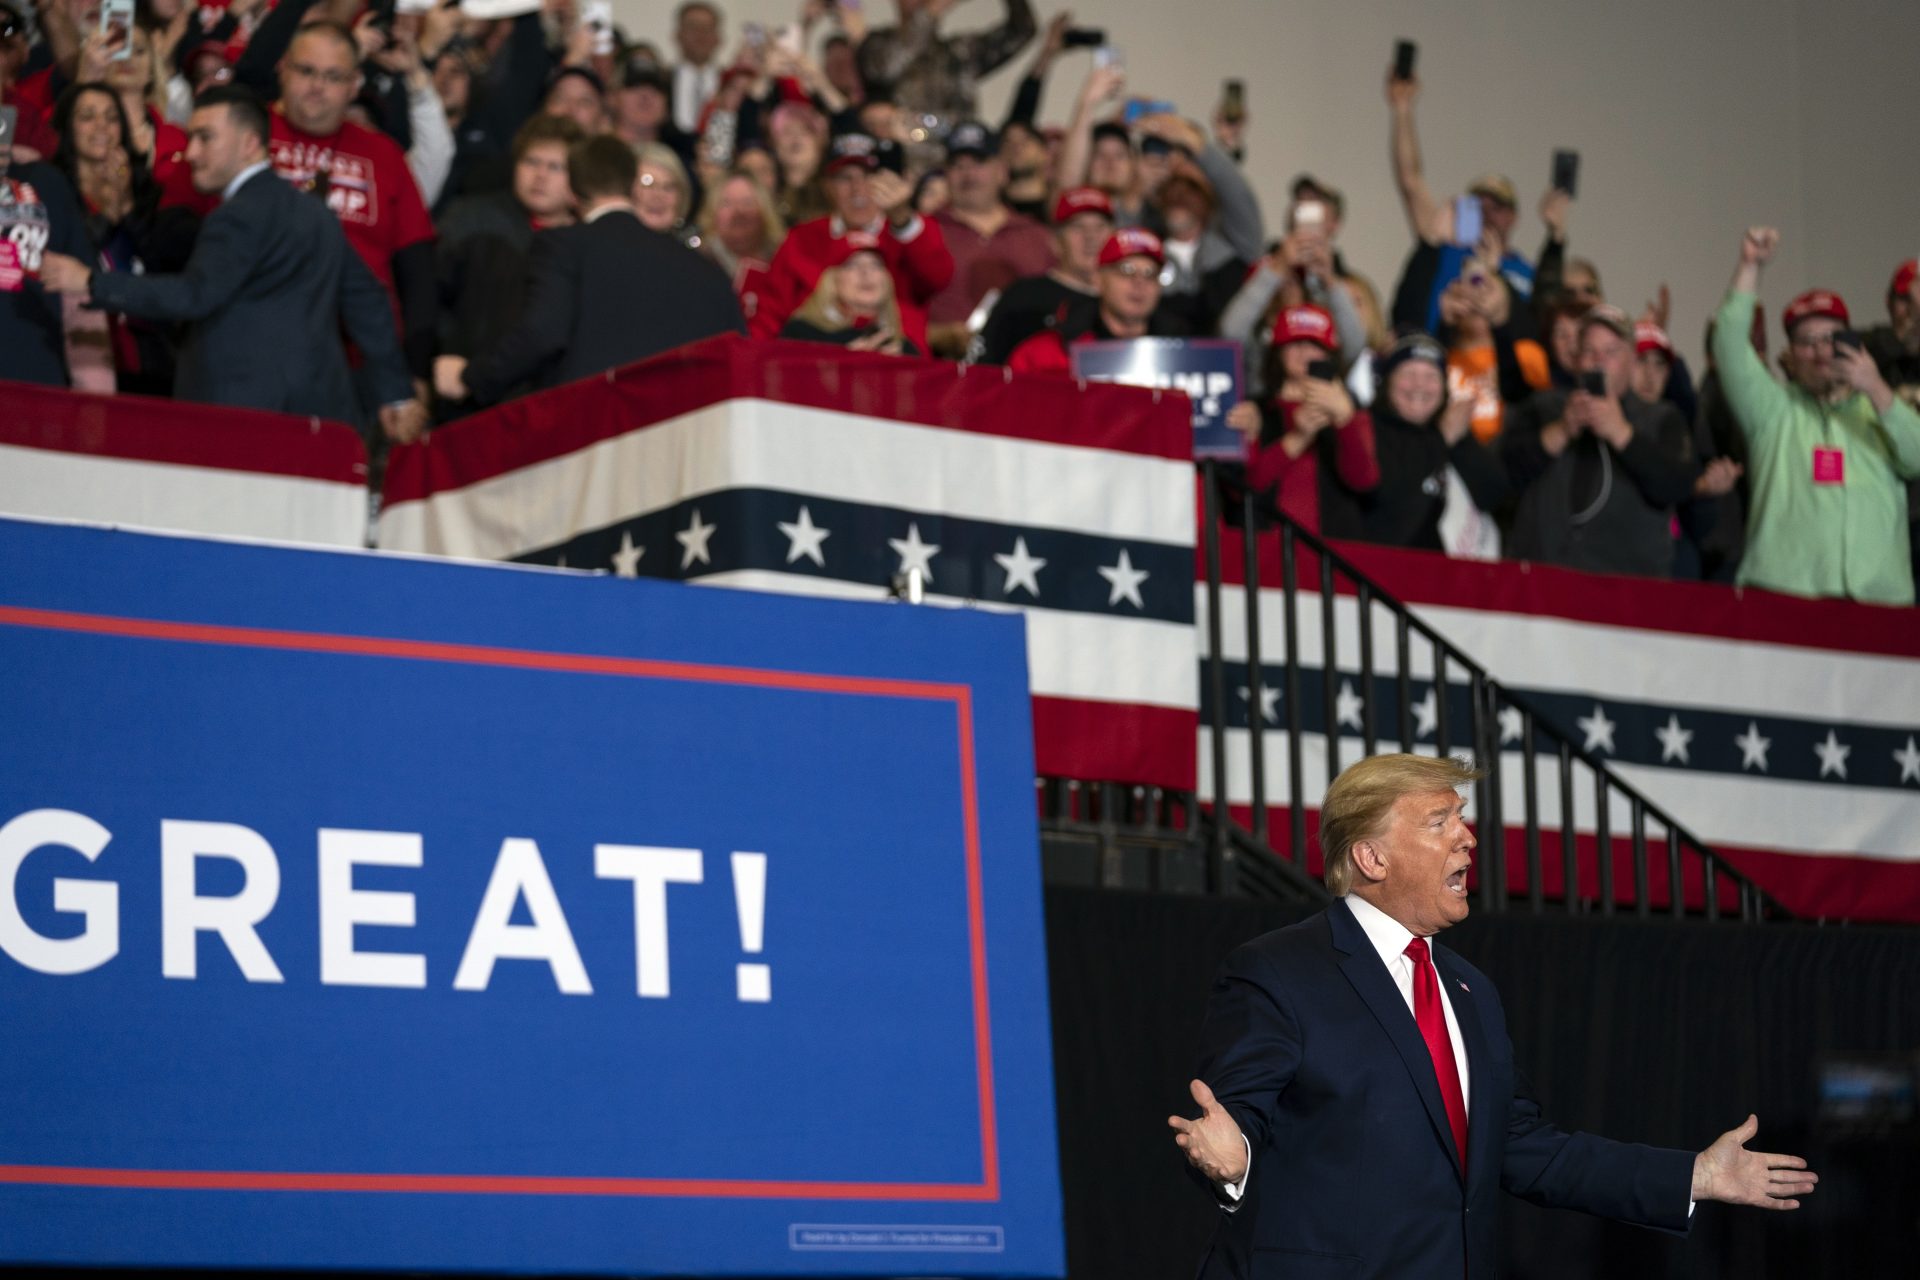 President Donald Trump arrives to speak at a campaign rally at the Wildwoods Convention Center Oceanfront, Tuesday, Jan. 28, 2020, in Wildwood, N.J.